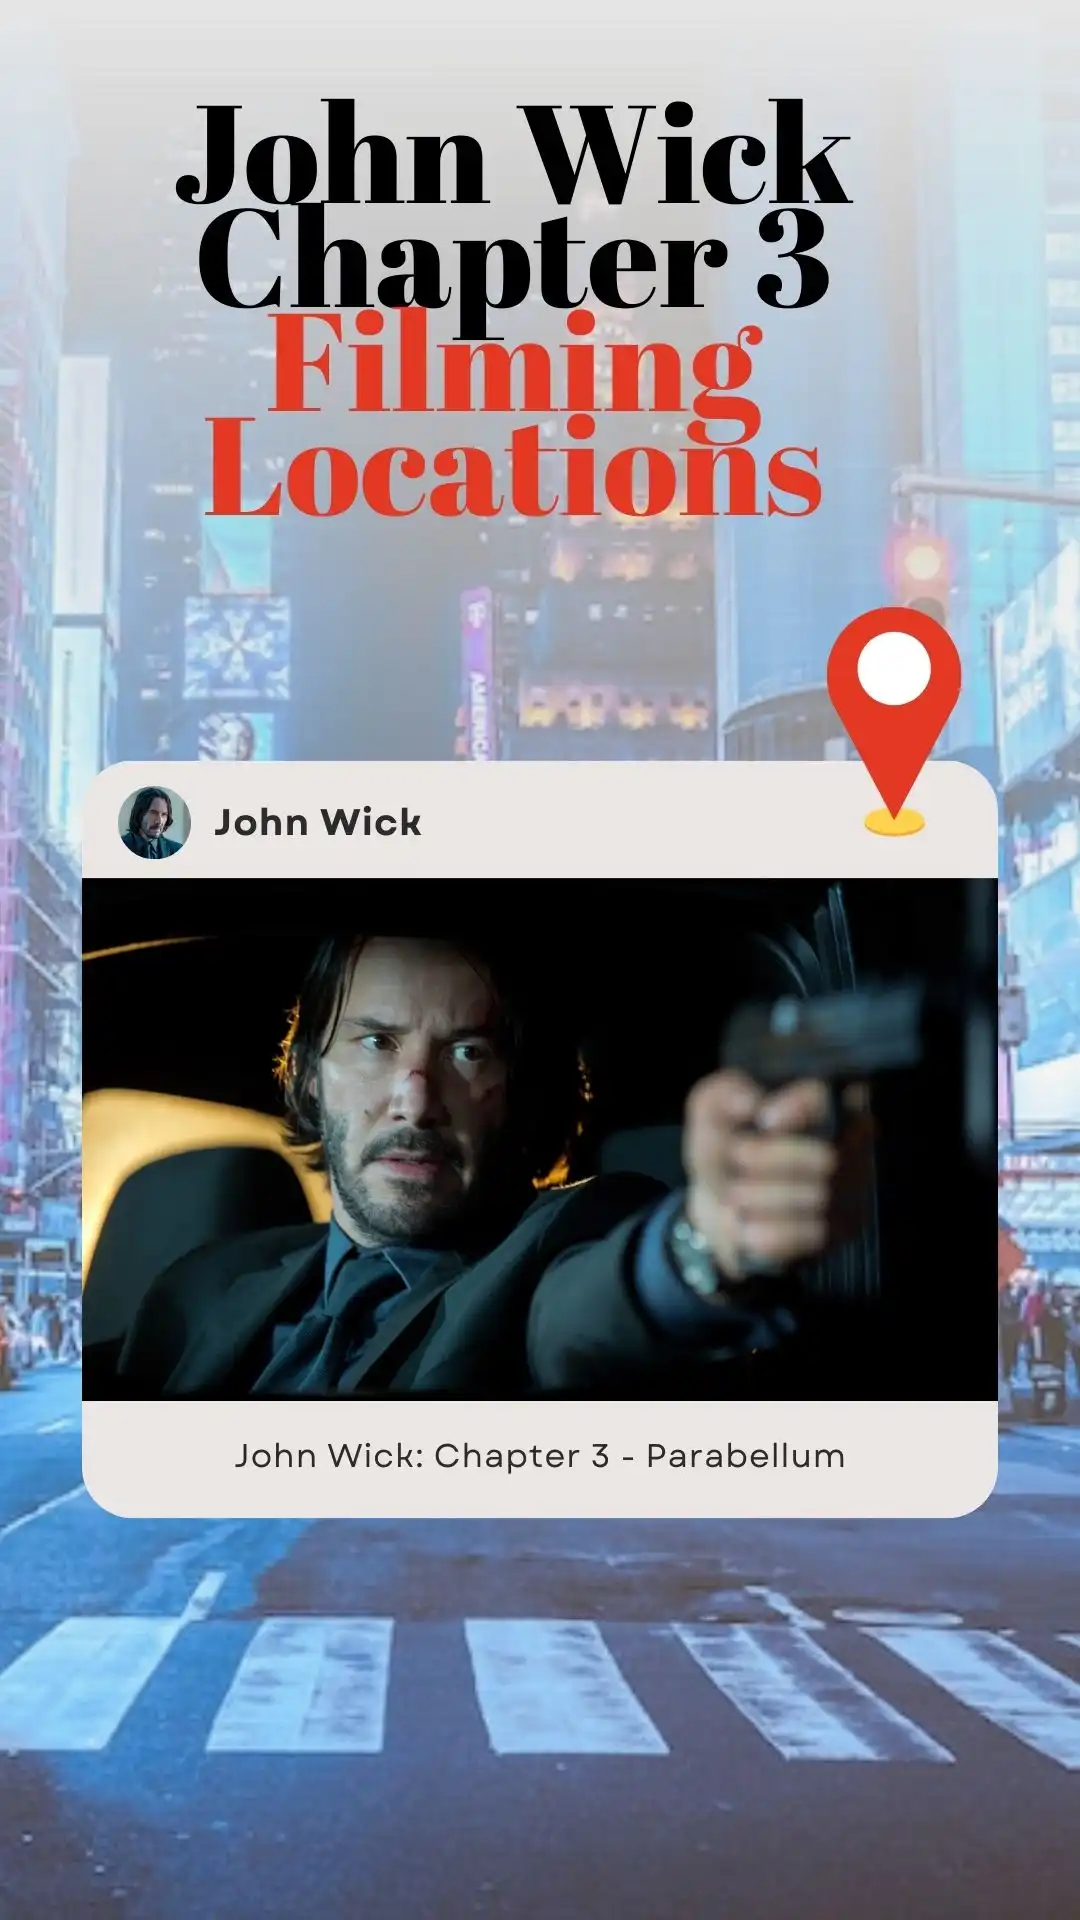 John Wick Chapter 3 Filming Locations